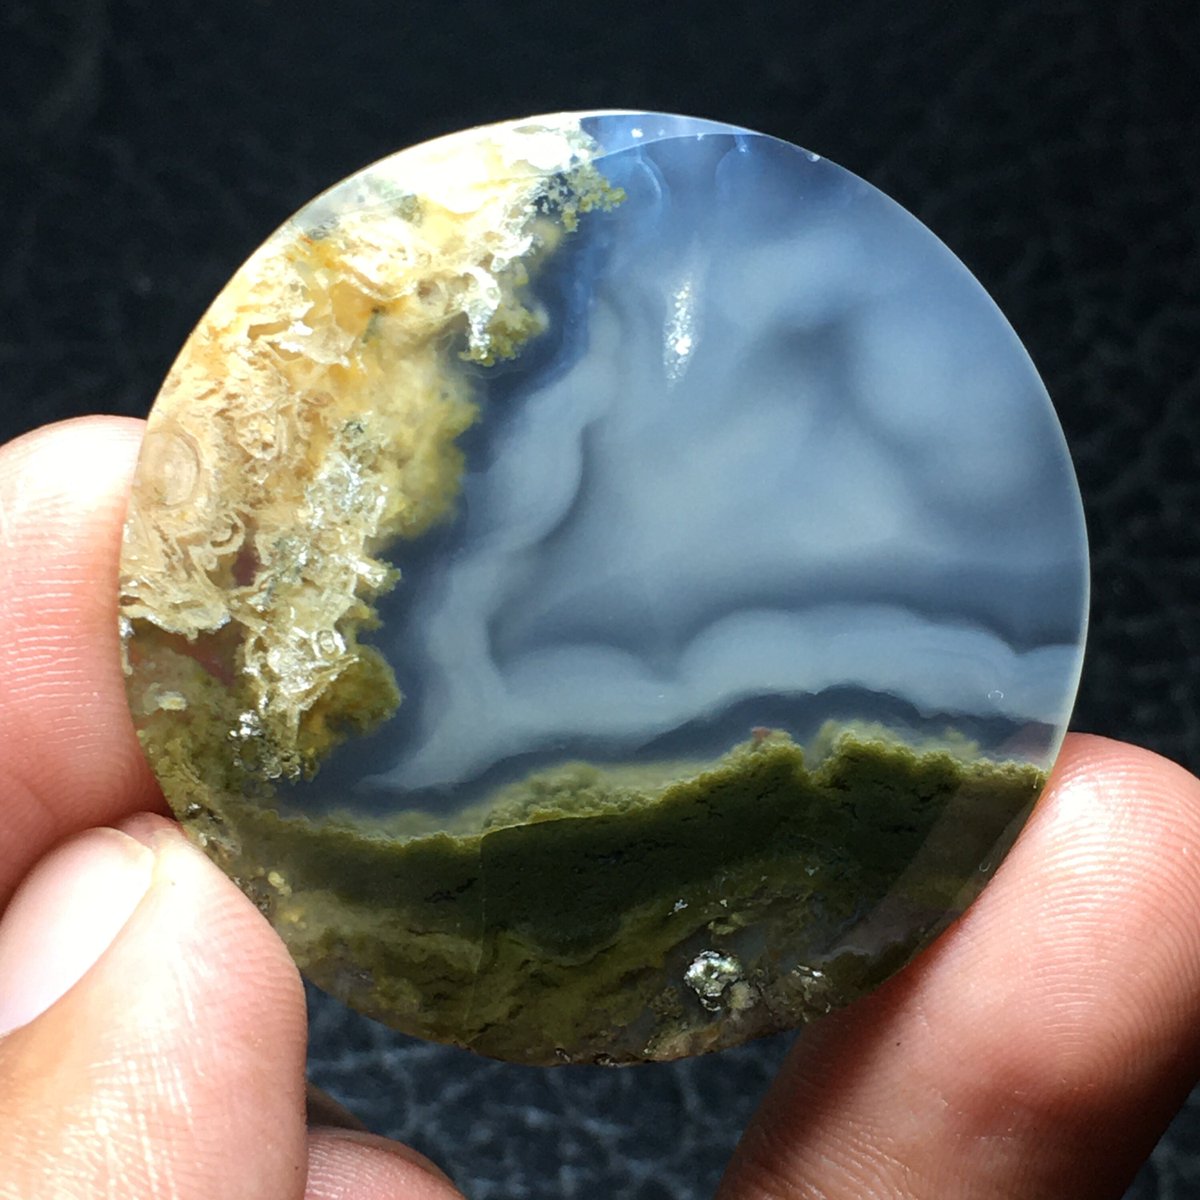 Excited to share the latest addition to my #etsy shop: Genuine Scenic Moss Agate Cabochon, Unique Natural Stone Cabochon, Scenic Moss Agate Cabochon 39x39x6 mm etsy.me/3CsIhdl #birthday #gemstone #agate #easter #naturalstonejewelry #handmadegemstone #mossagatec